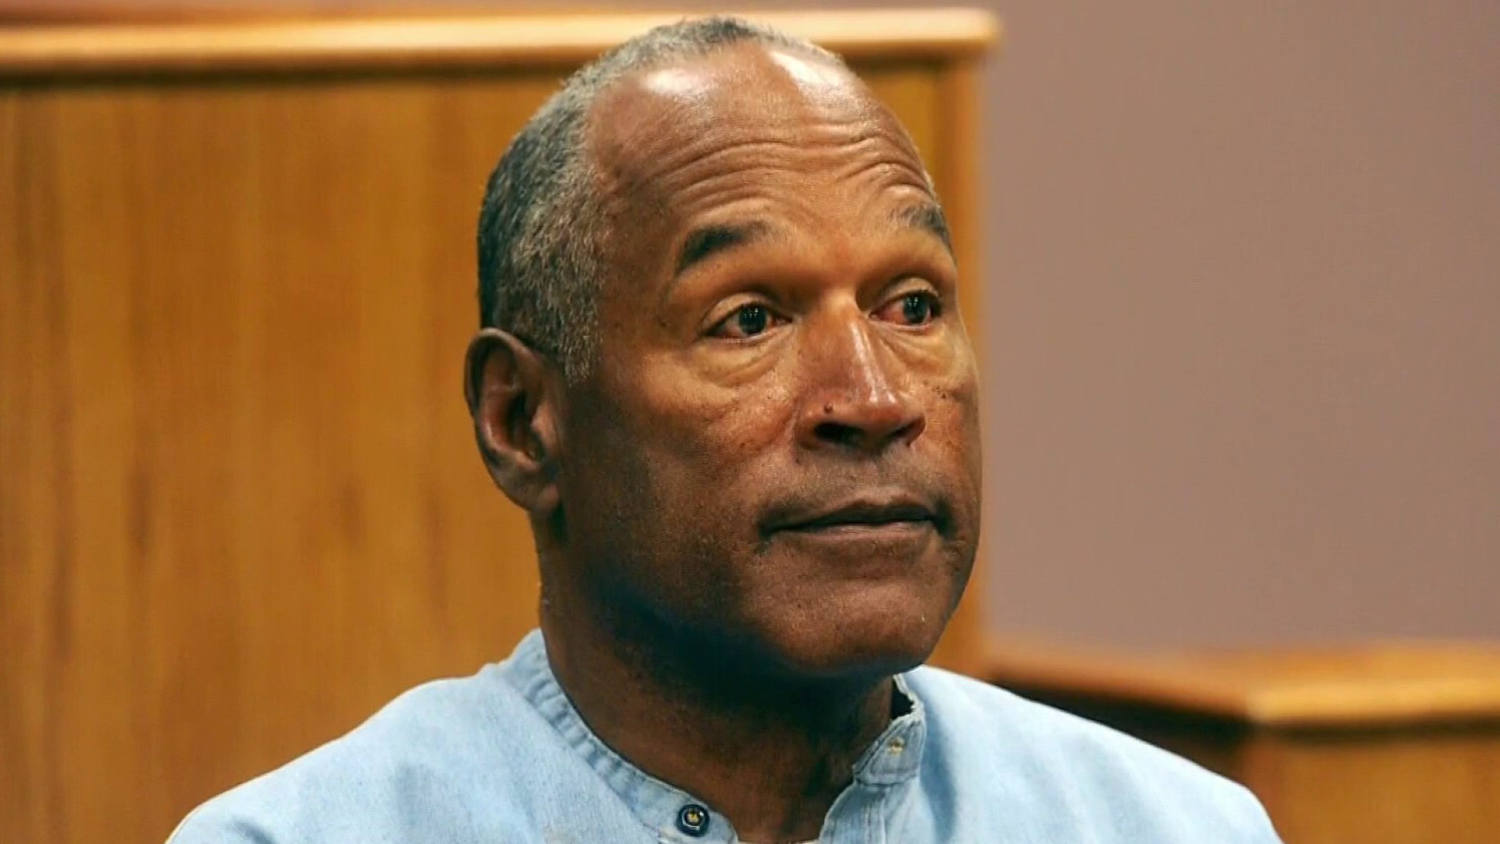 O.J. Simpson leaves behind a complicated legacy after death